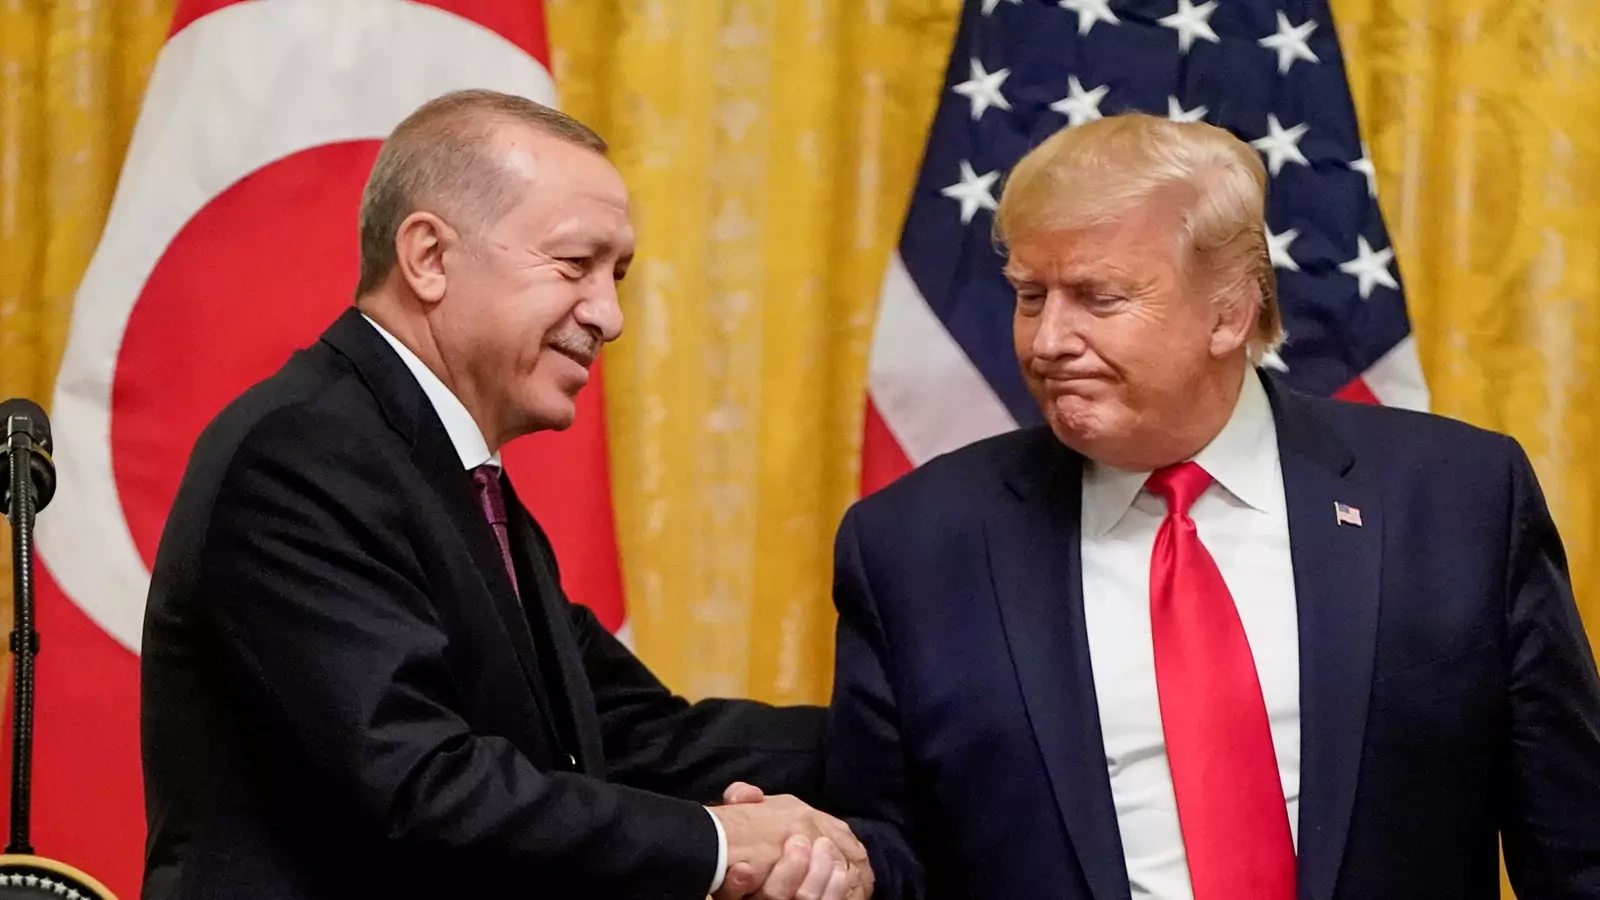 U.S. President Donald Trump greets Turkey's President Tayyip Erdogan during a joint news conference at the White House in Washington, U.S., November 13, 2019.